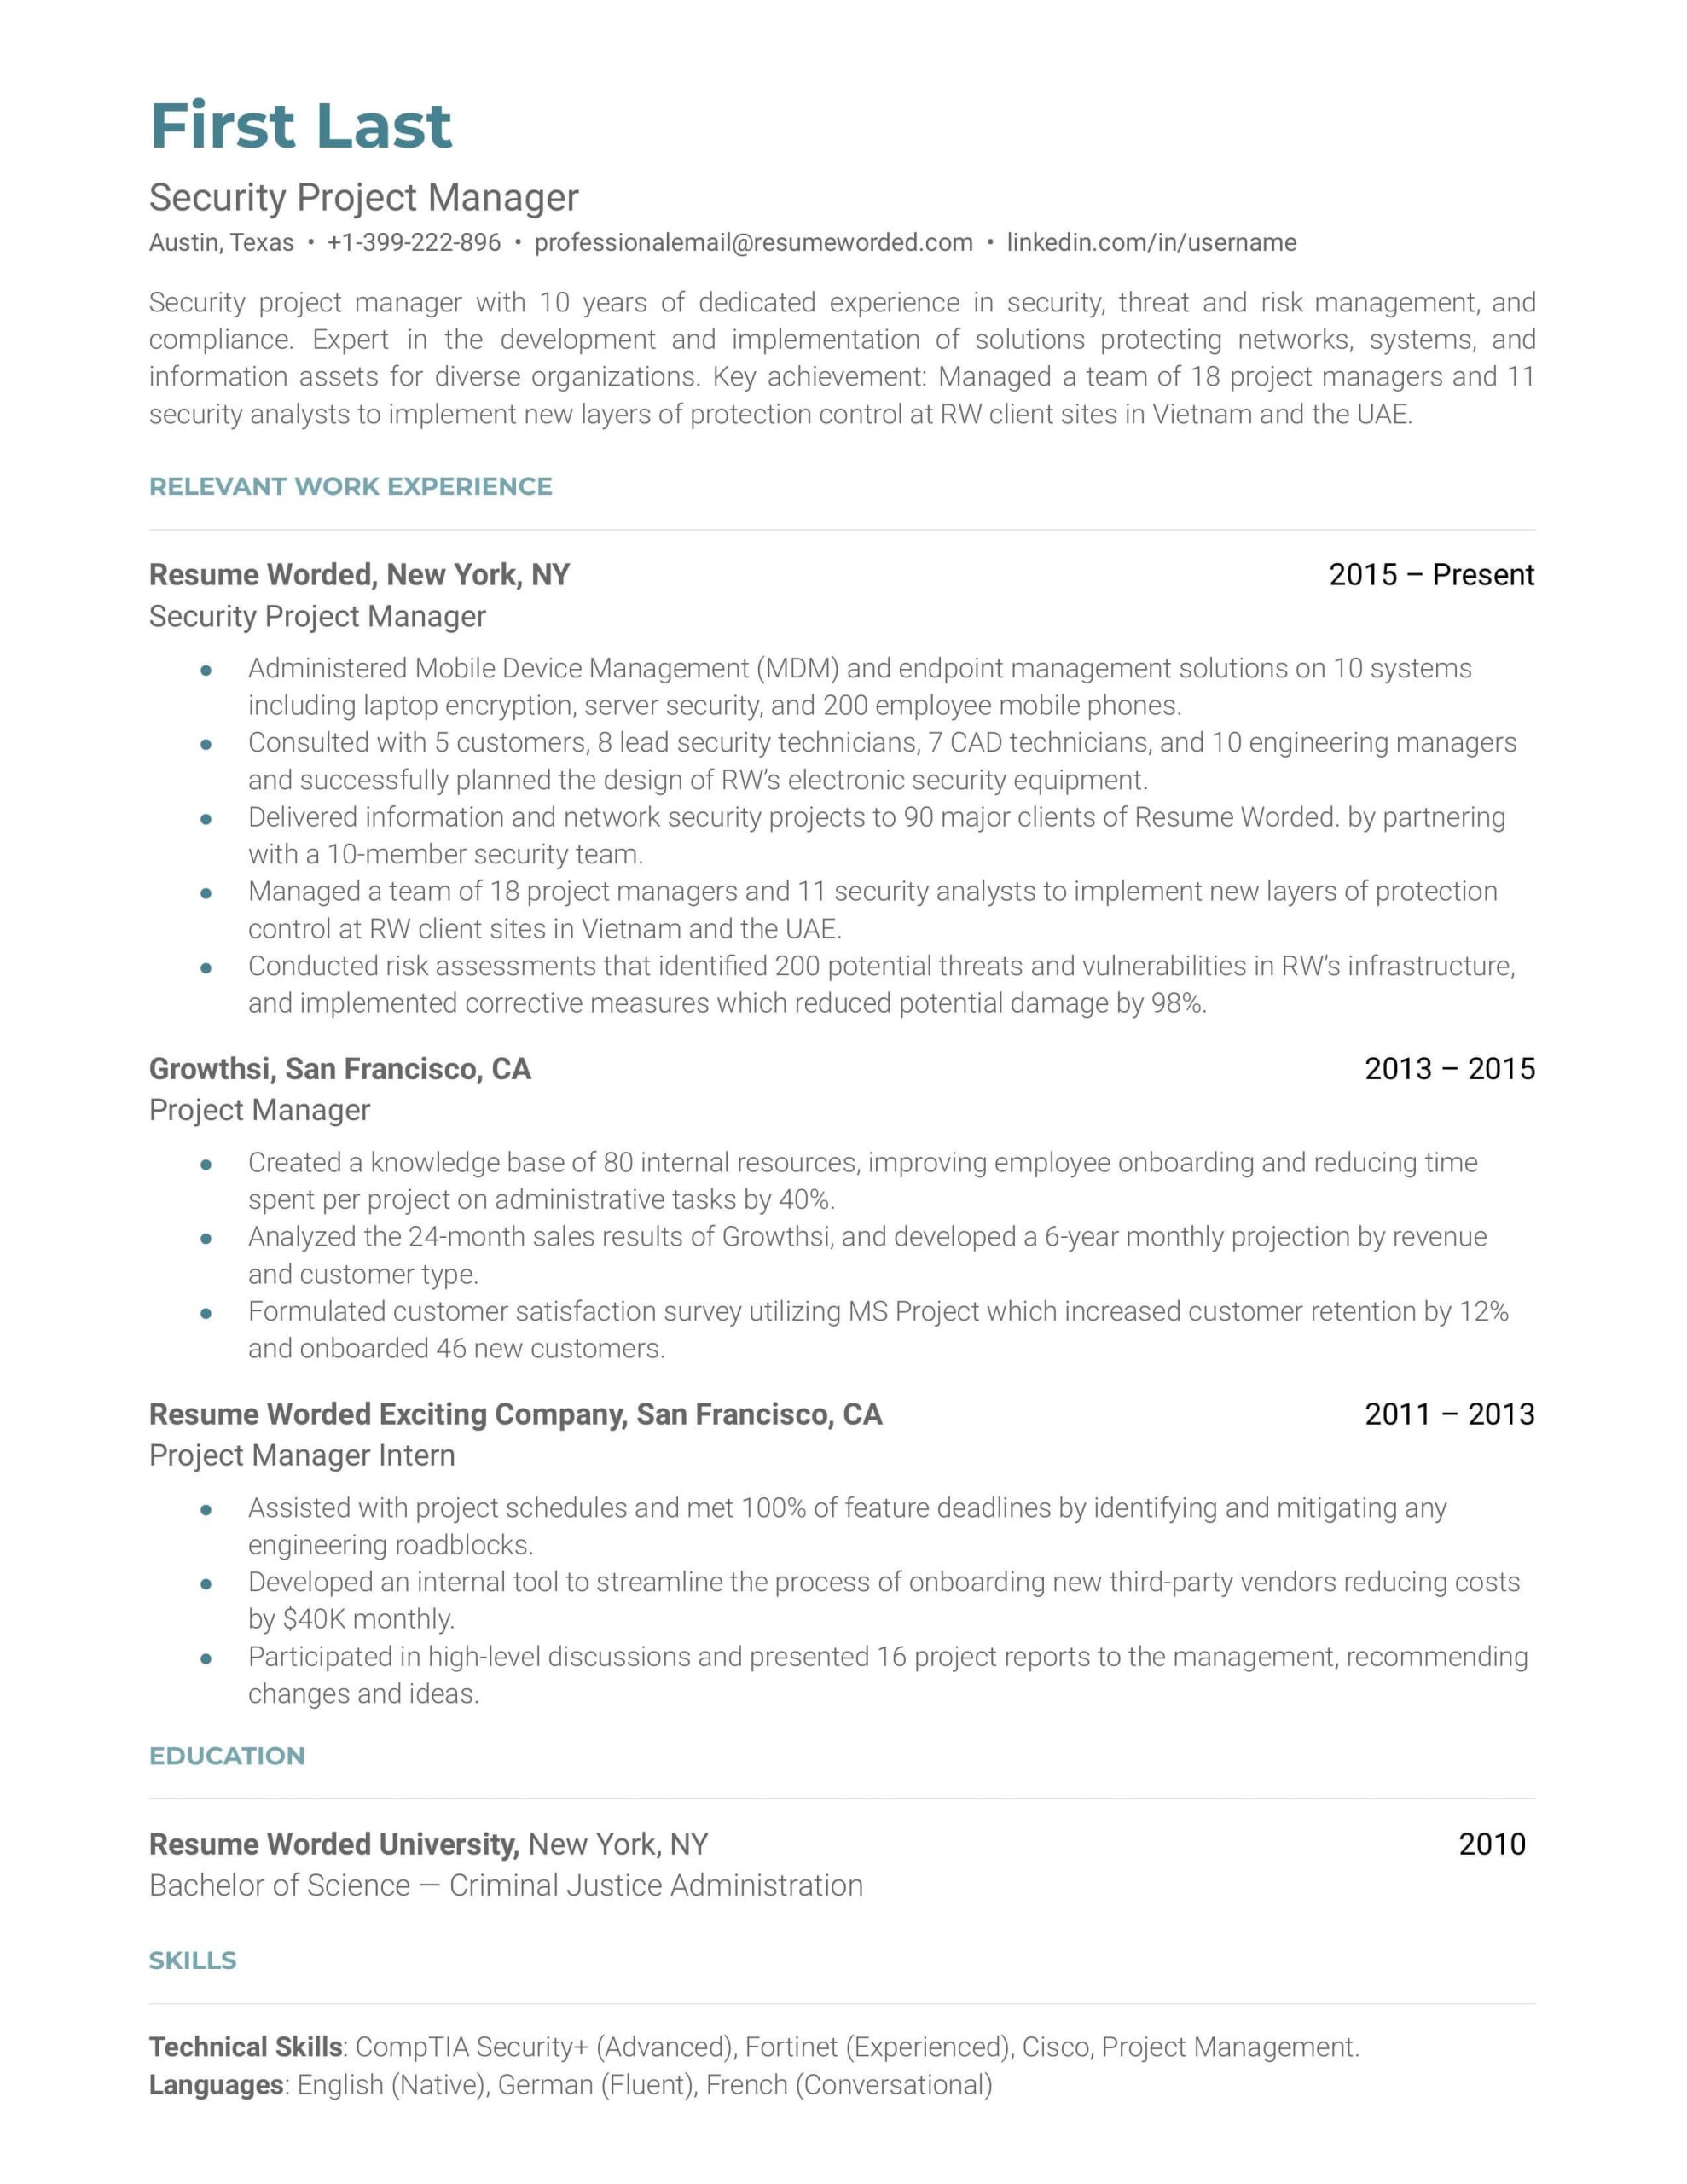 Sample Of Resume On Vulnerability Remediation 8 Cyber Security Resume Examples for 2022 Resume Worded